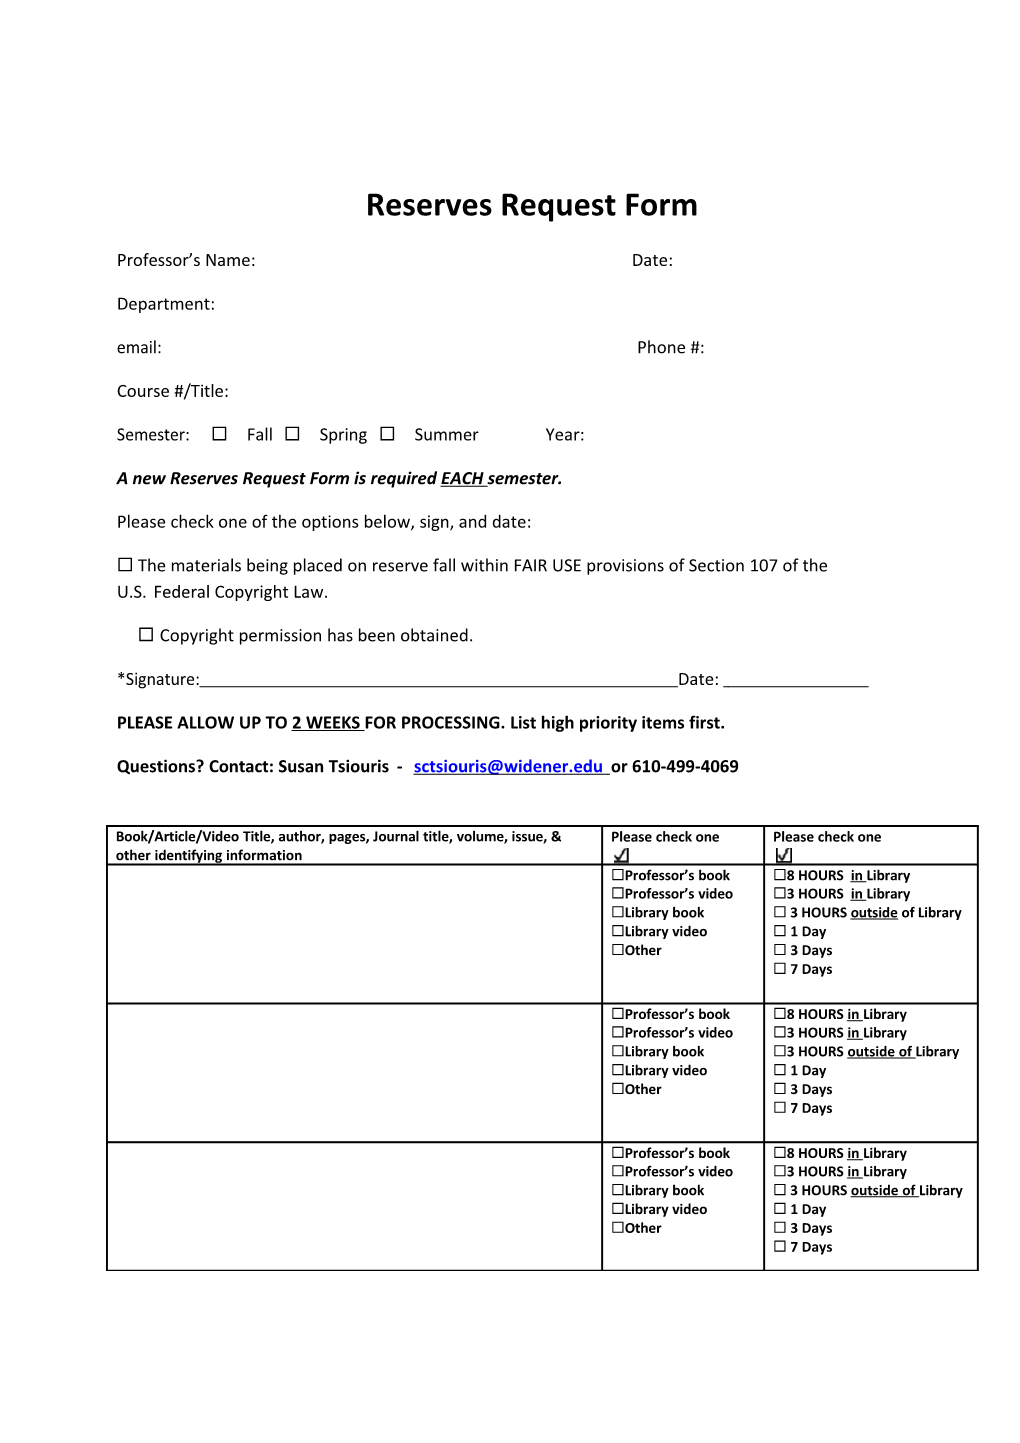 A New Reserves Request Form Is Required EACH Semester